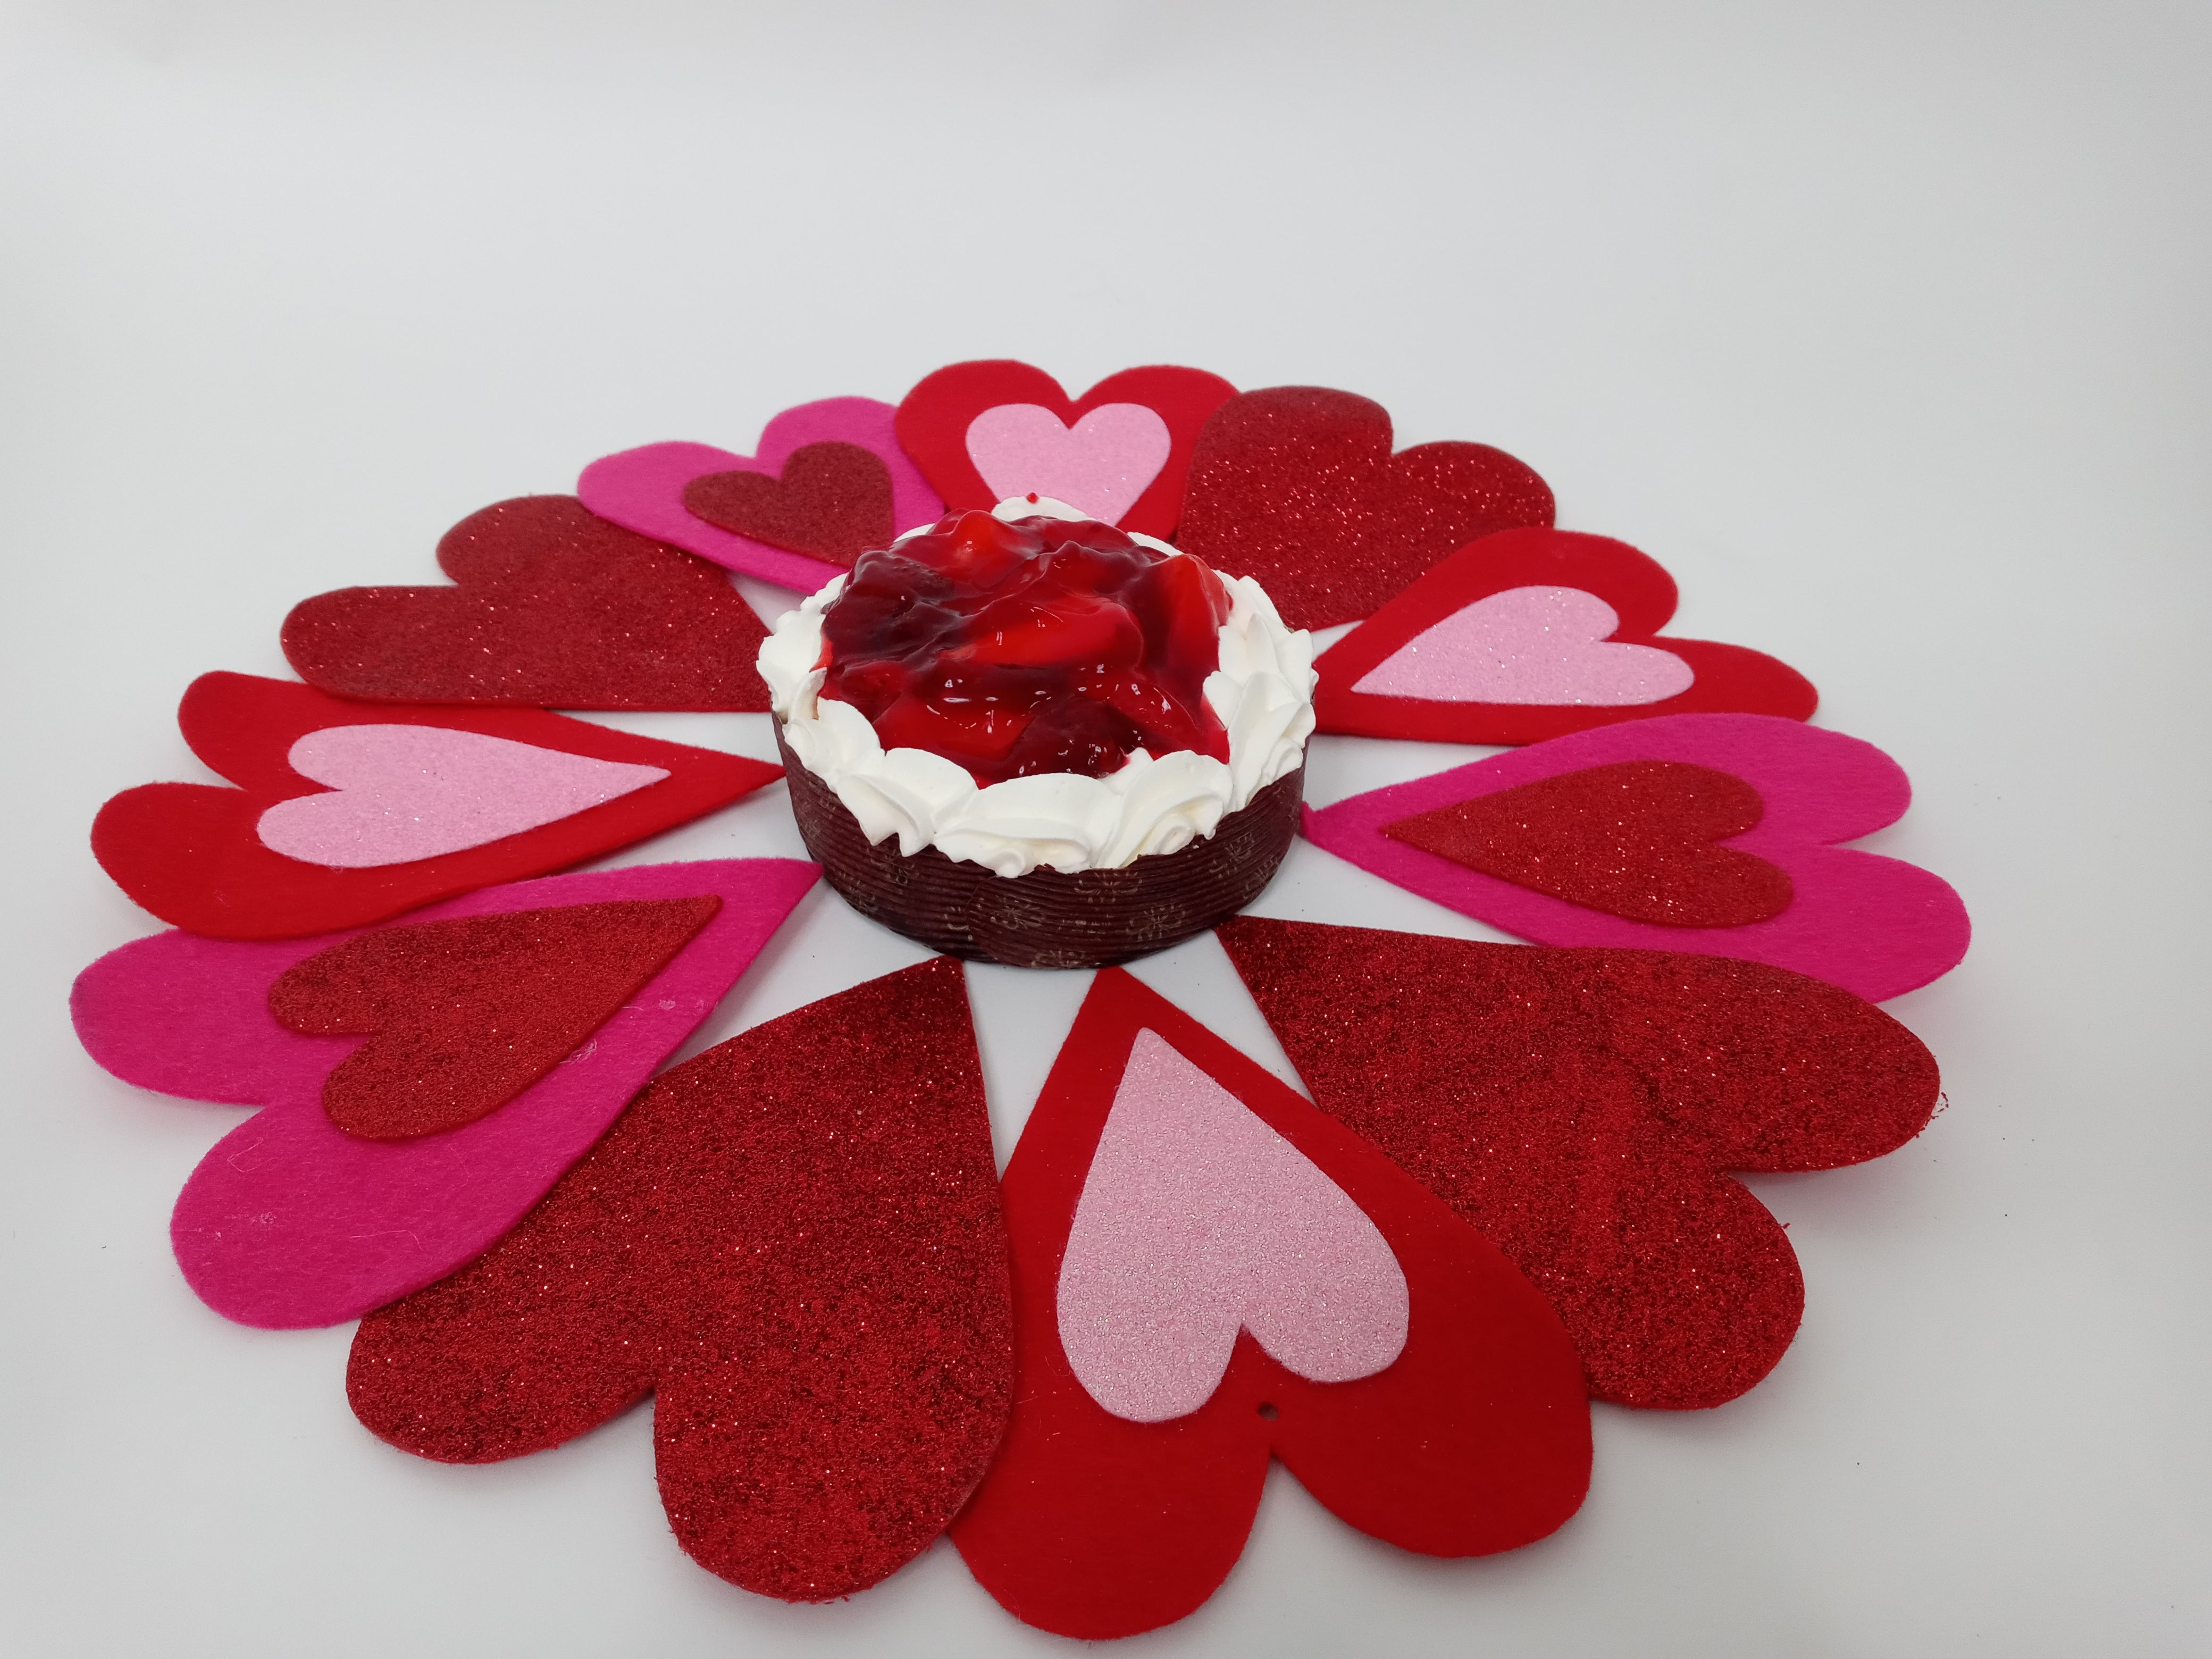 Individual Size Valentine's Day Cakes